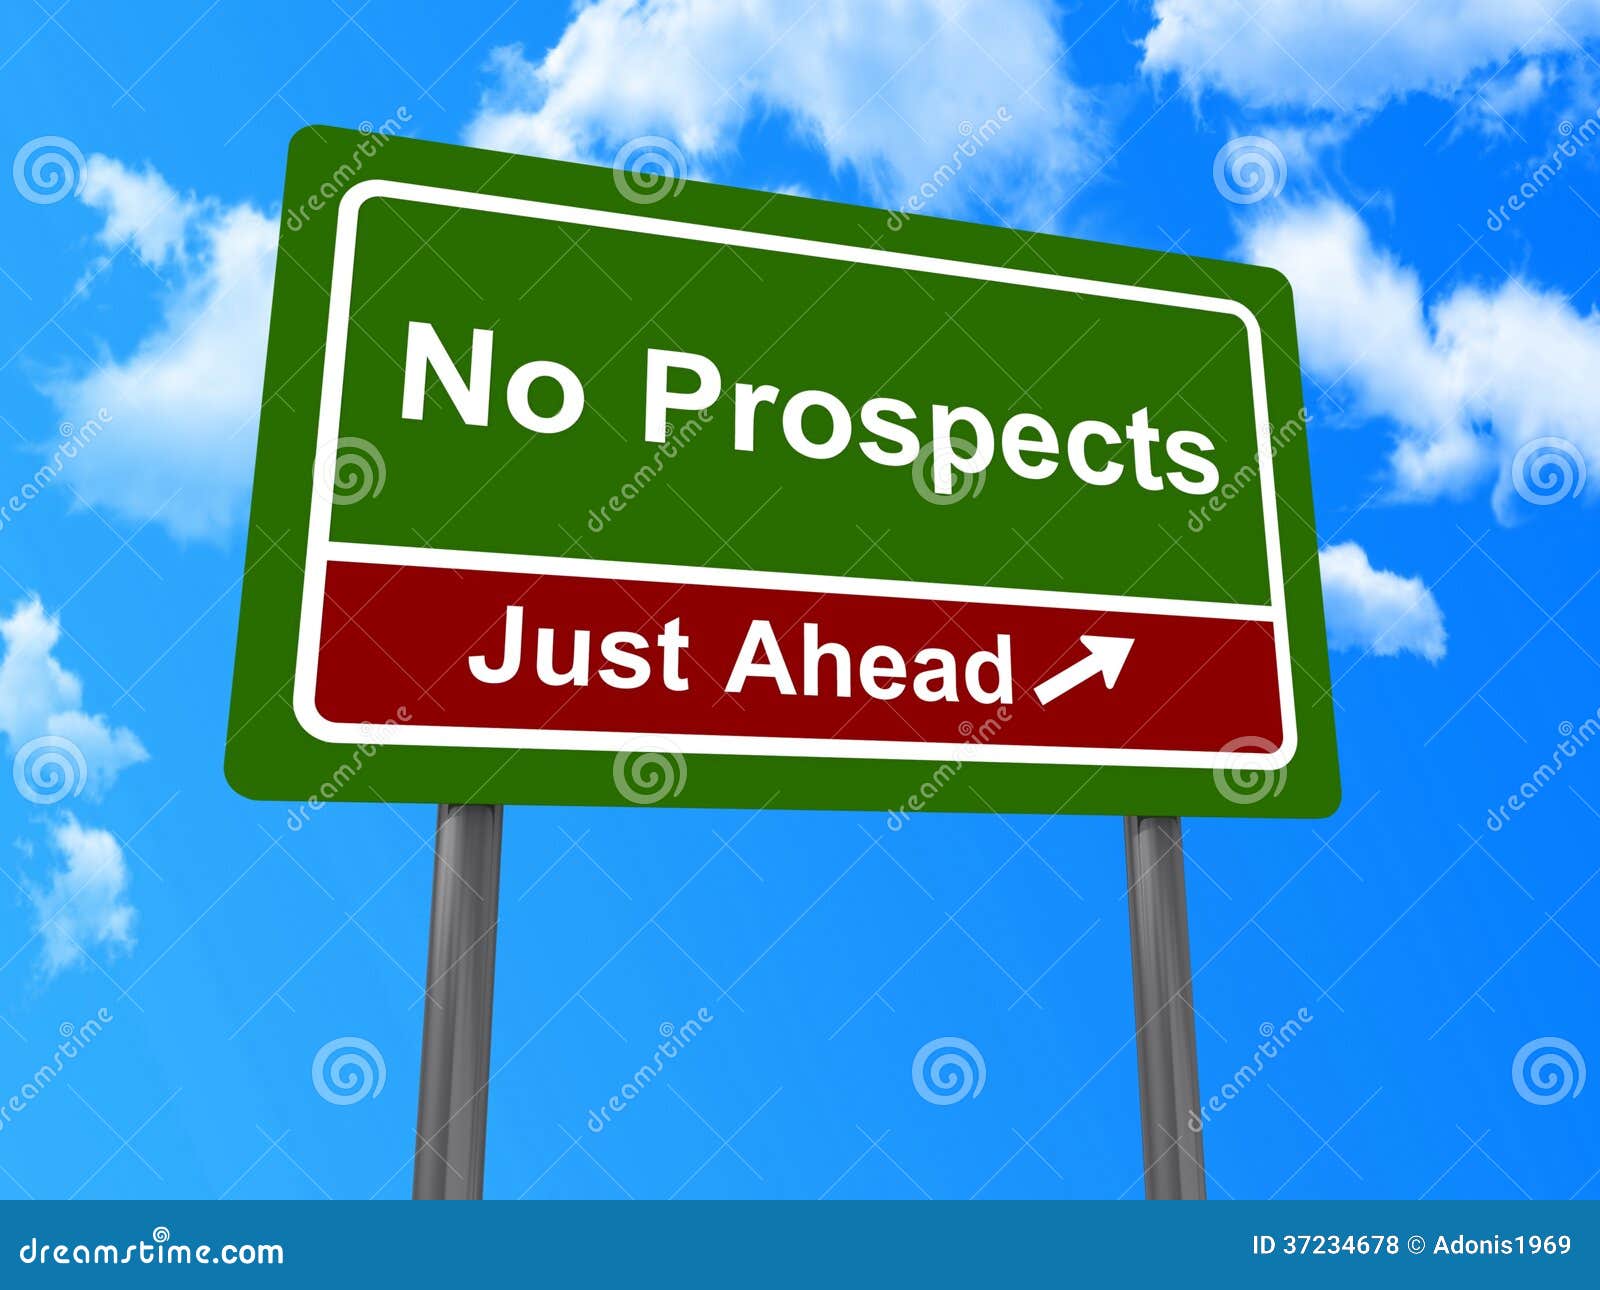 no prospects just ahead sign